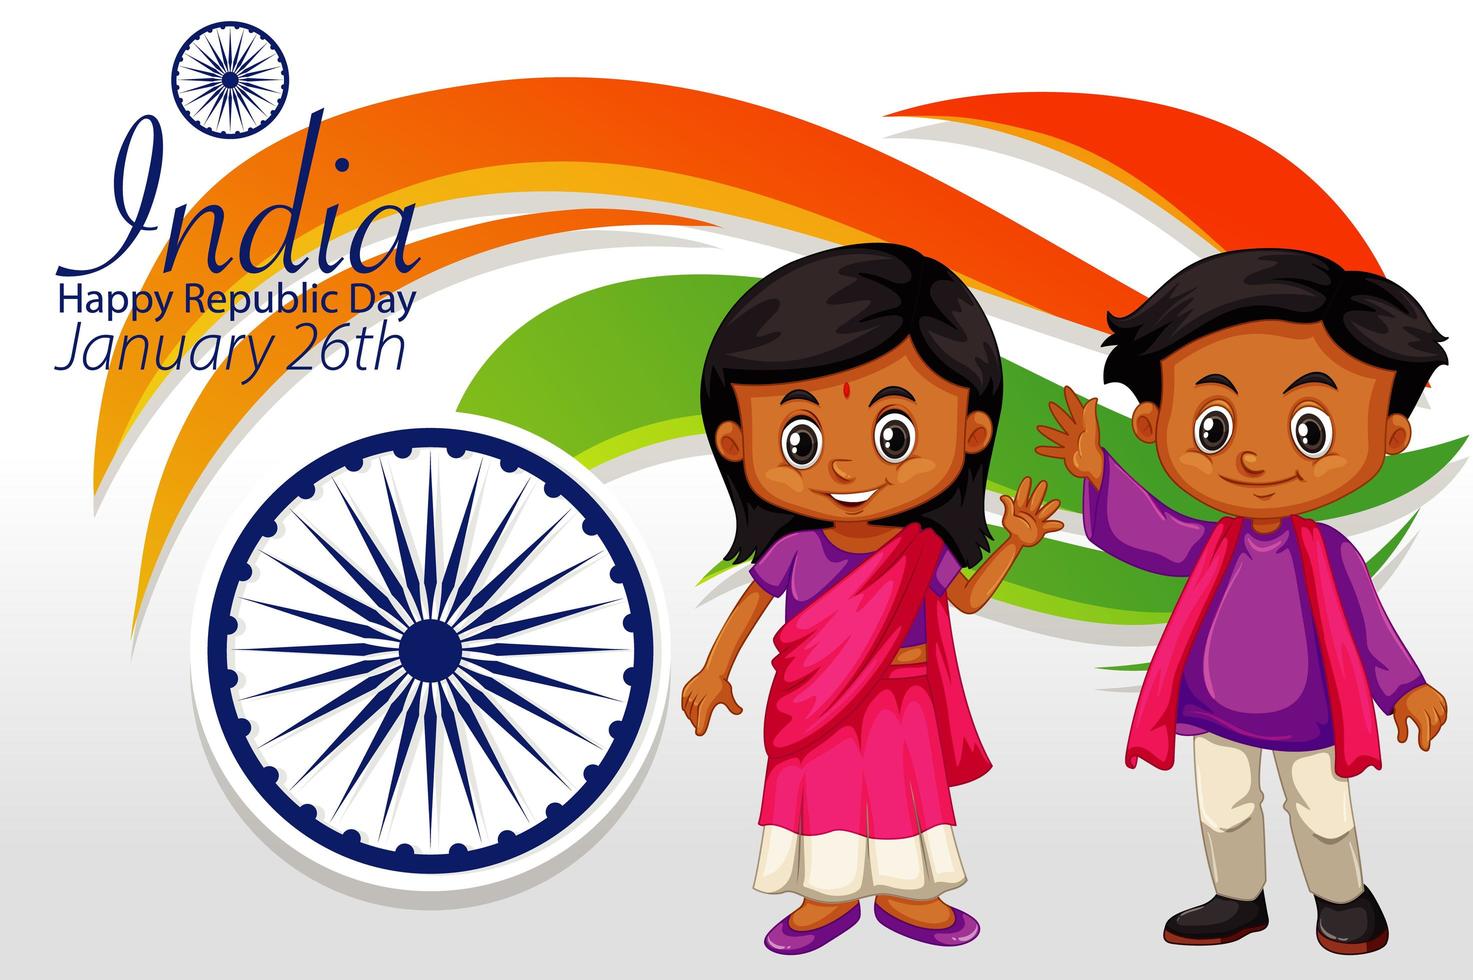 India Happy Republic Day Poster with Happy Kids vector